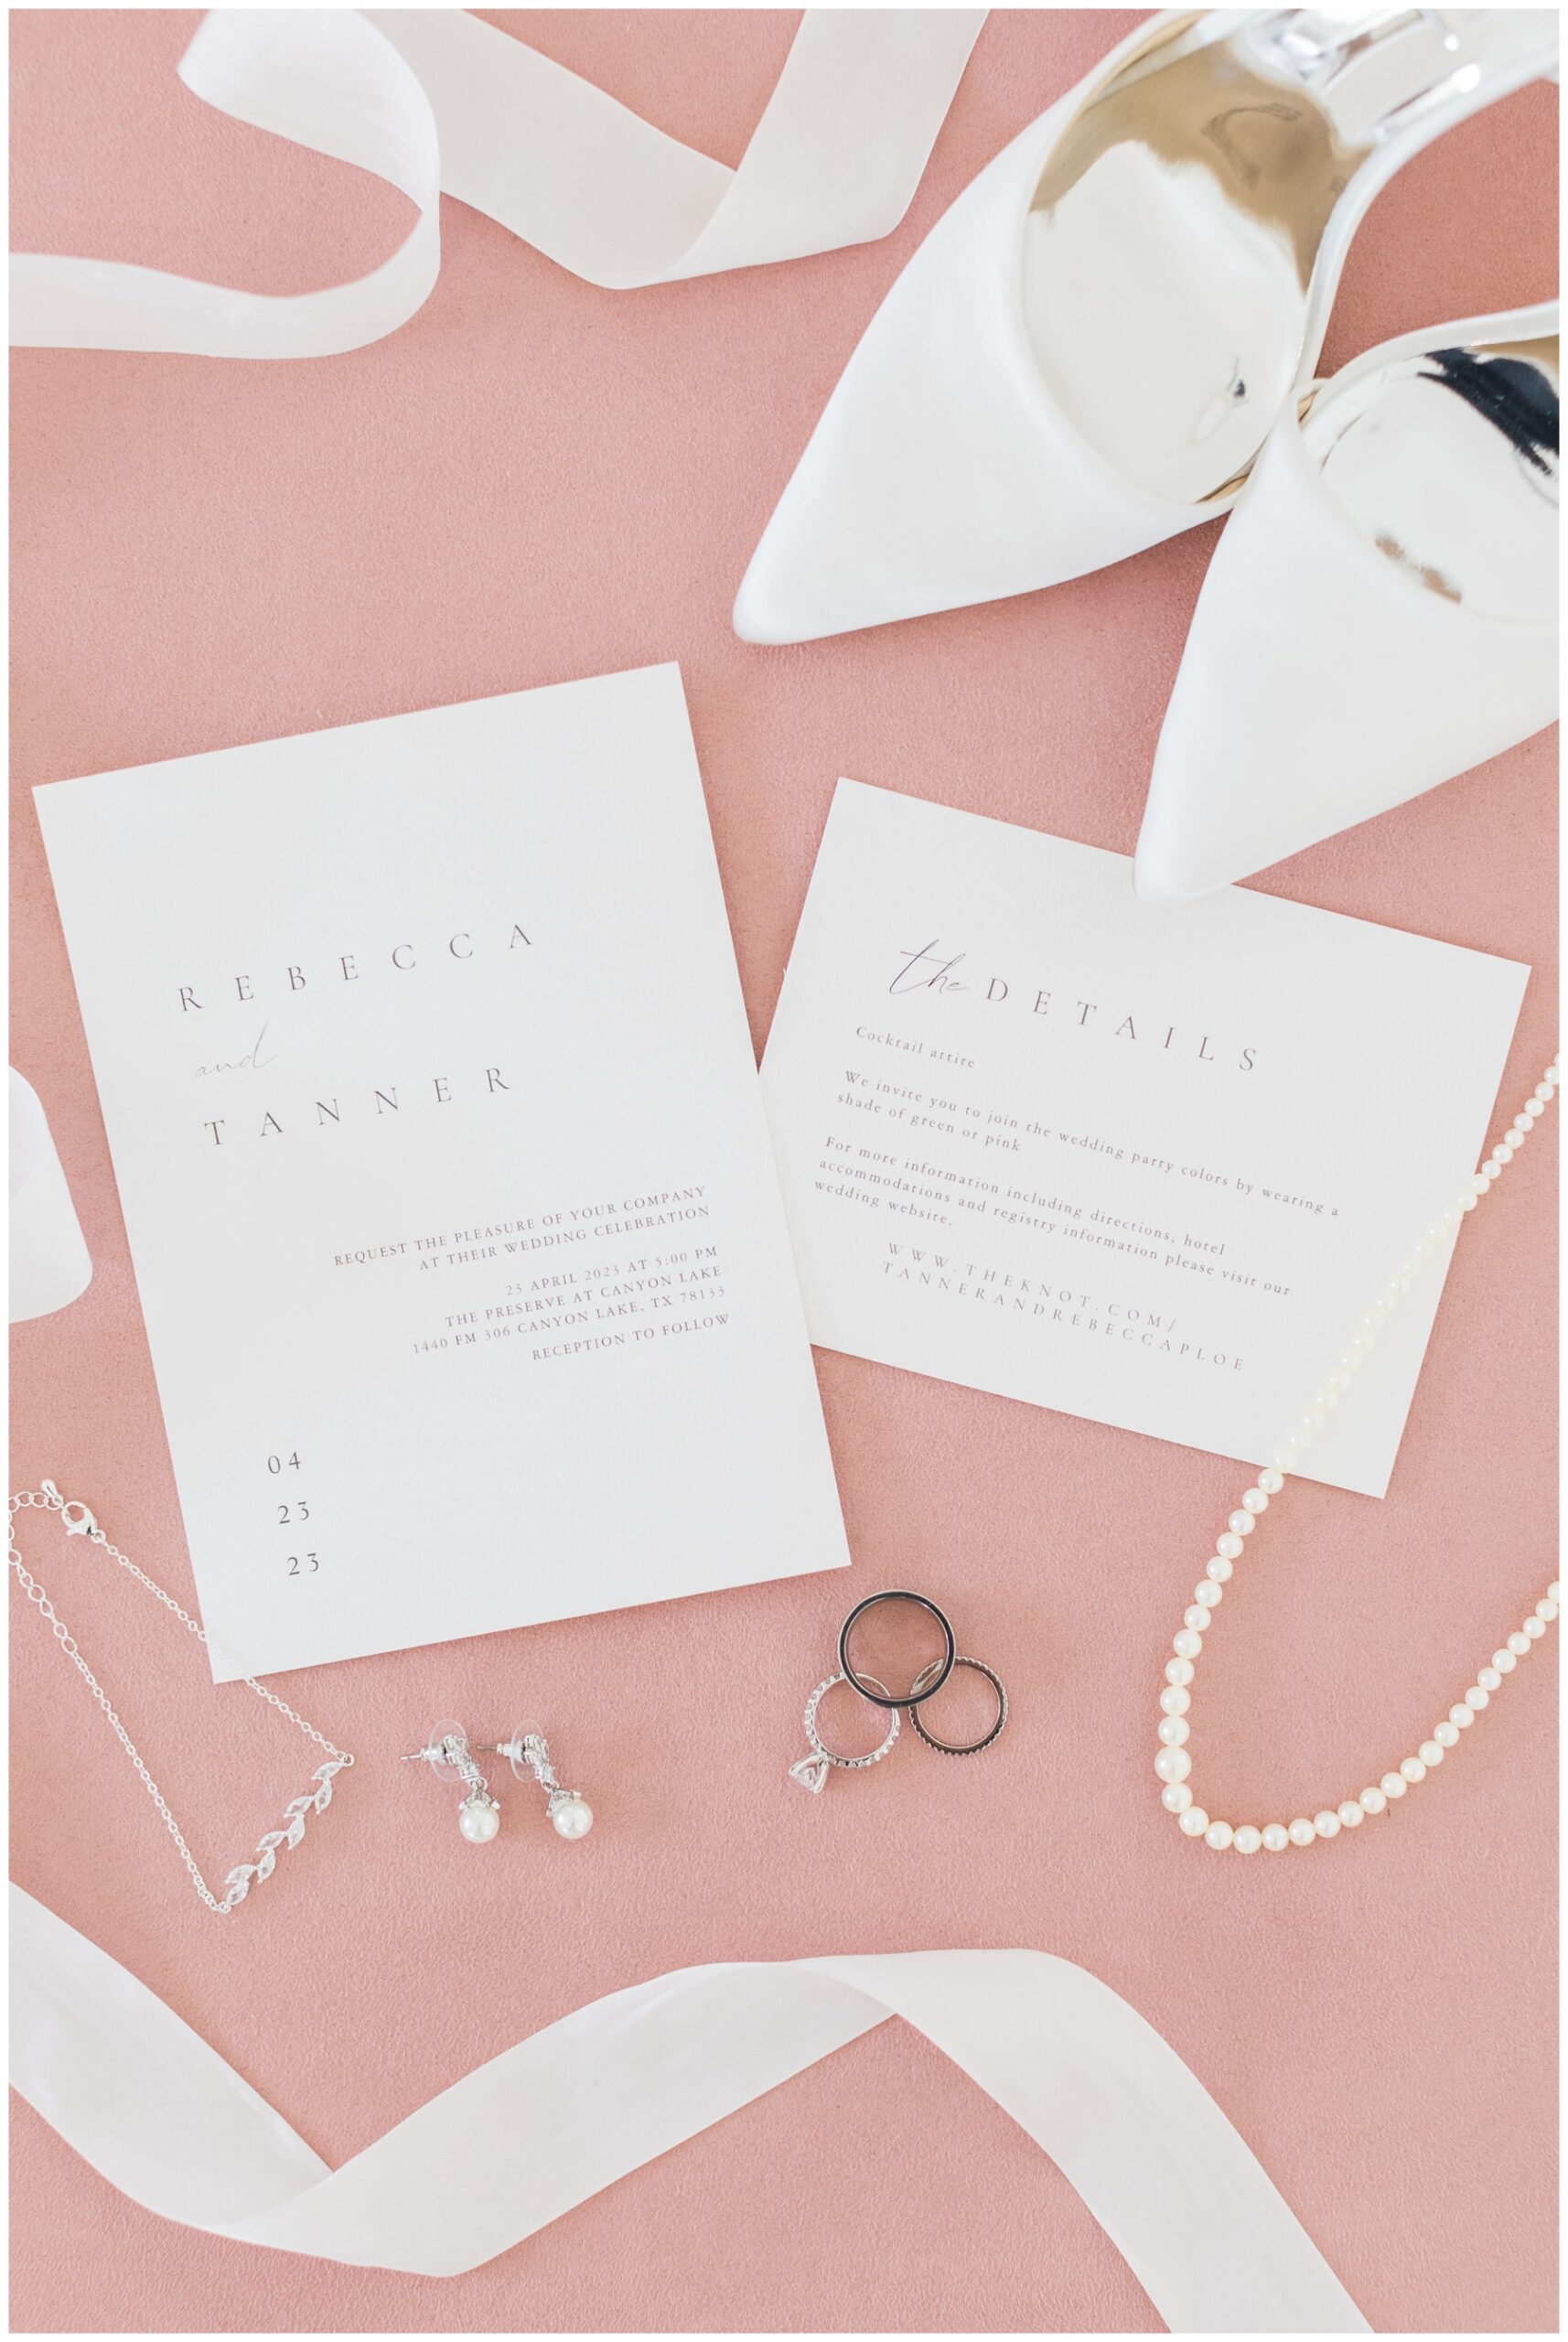 Flatlay of a classic wedding invitation with pearl jewelry and Badgley Mischka wedding shoes